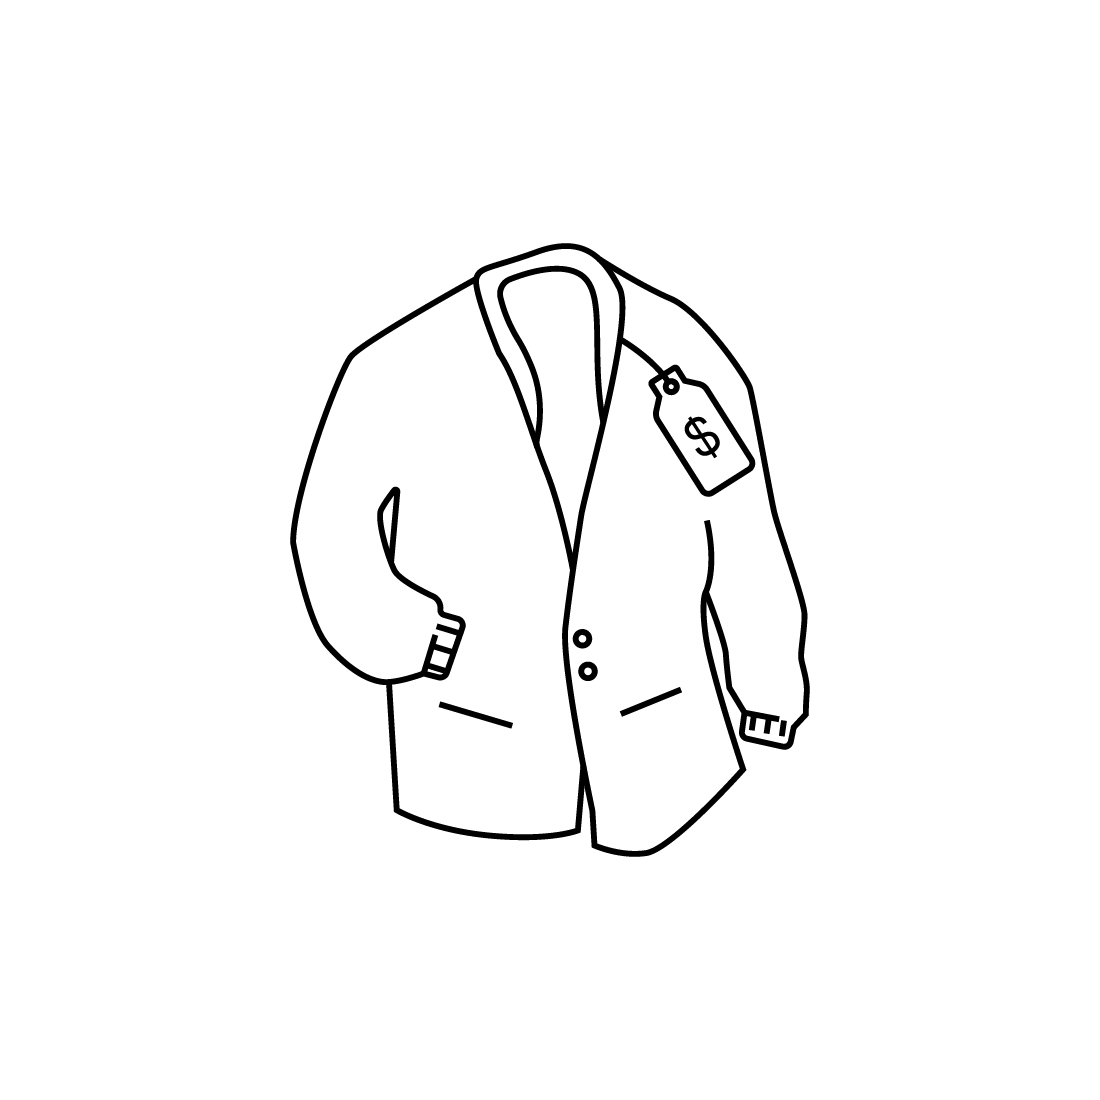 Black and white drawing of a jacket.